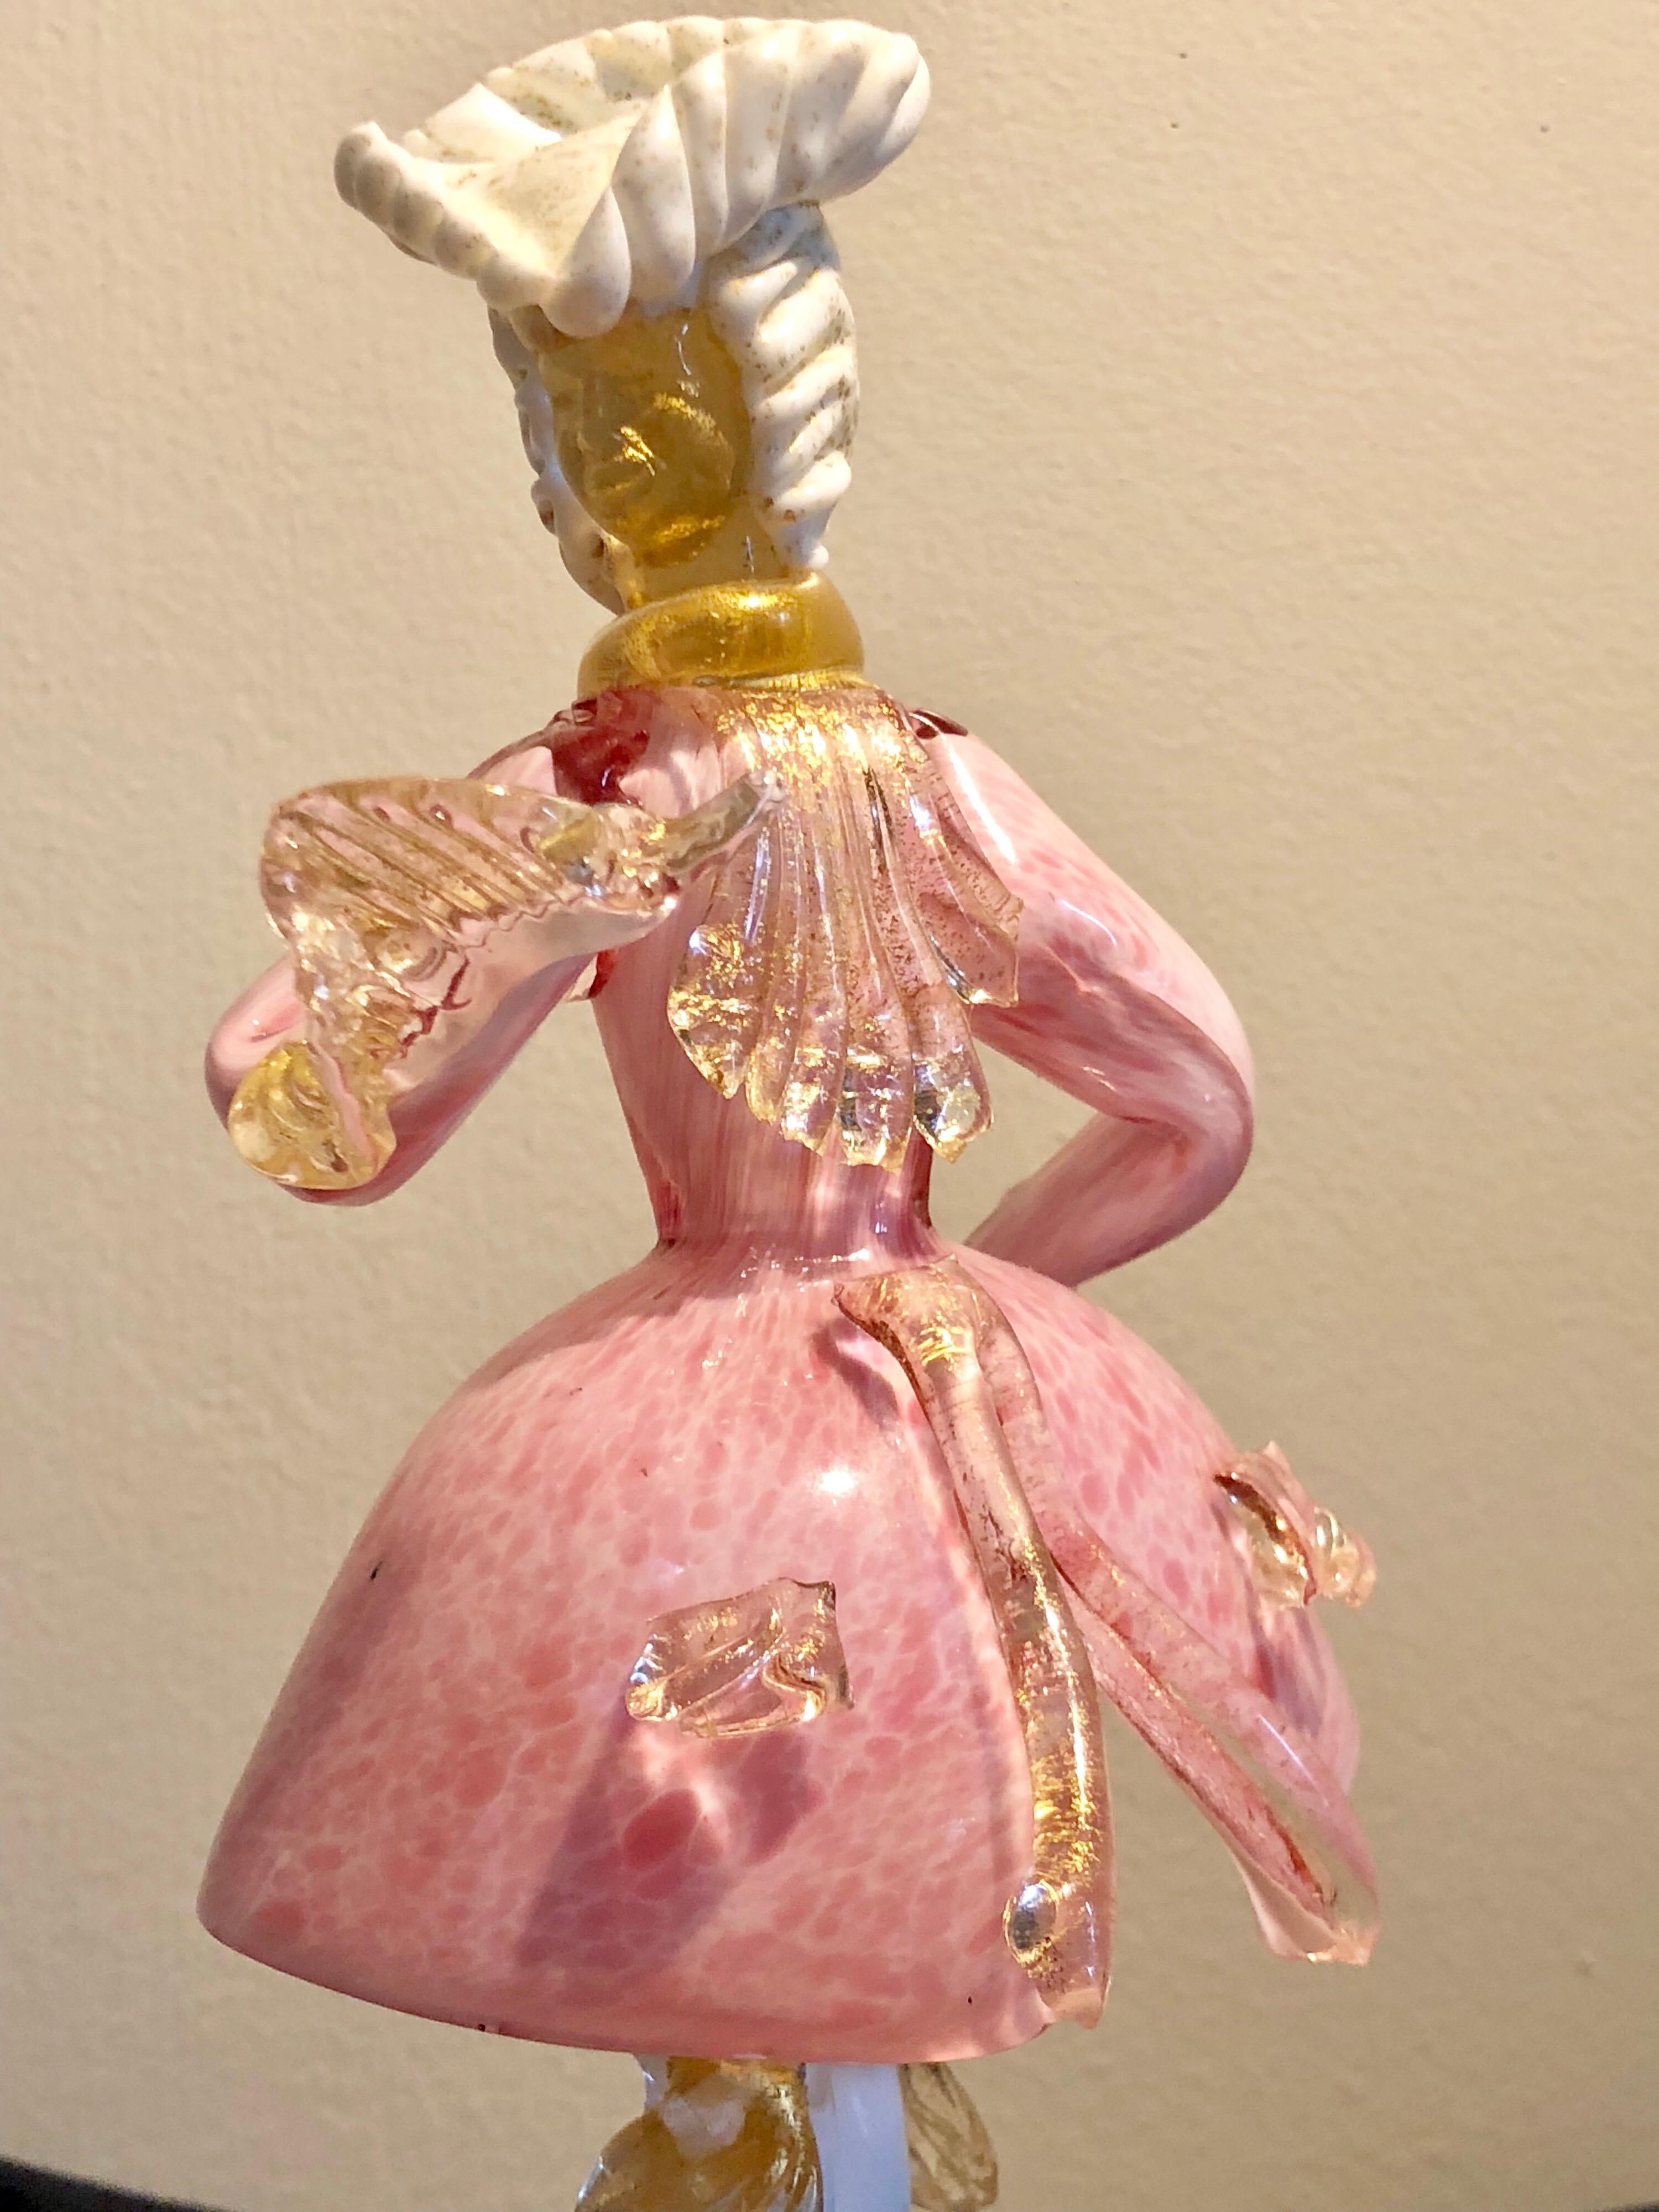 Venetian Murano mid-20th century standing figure of gentleman attired in 18th century style costume
Rose pink and milk glass with speckled gold detail.